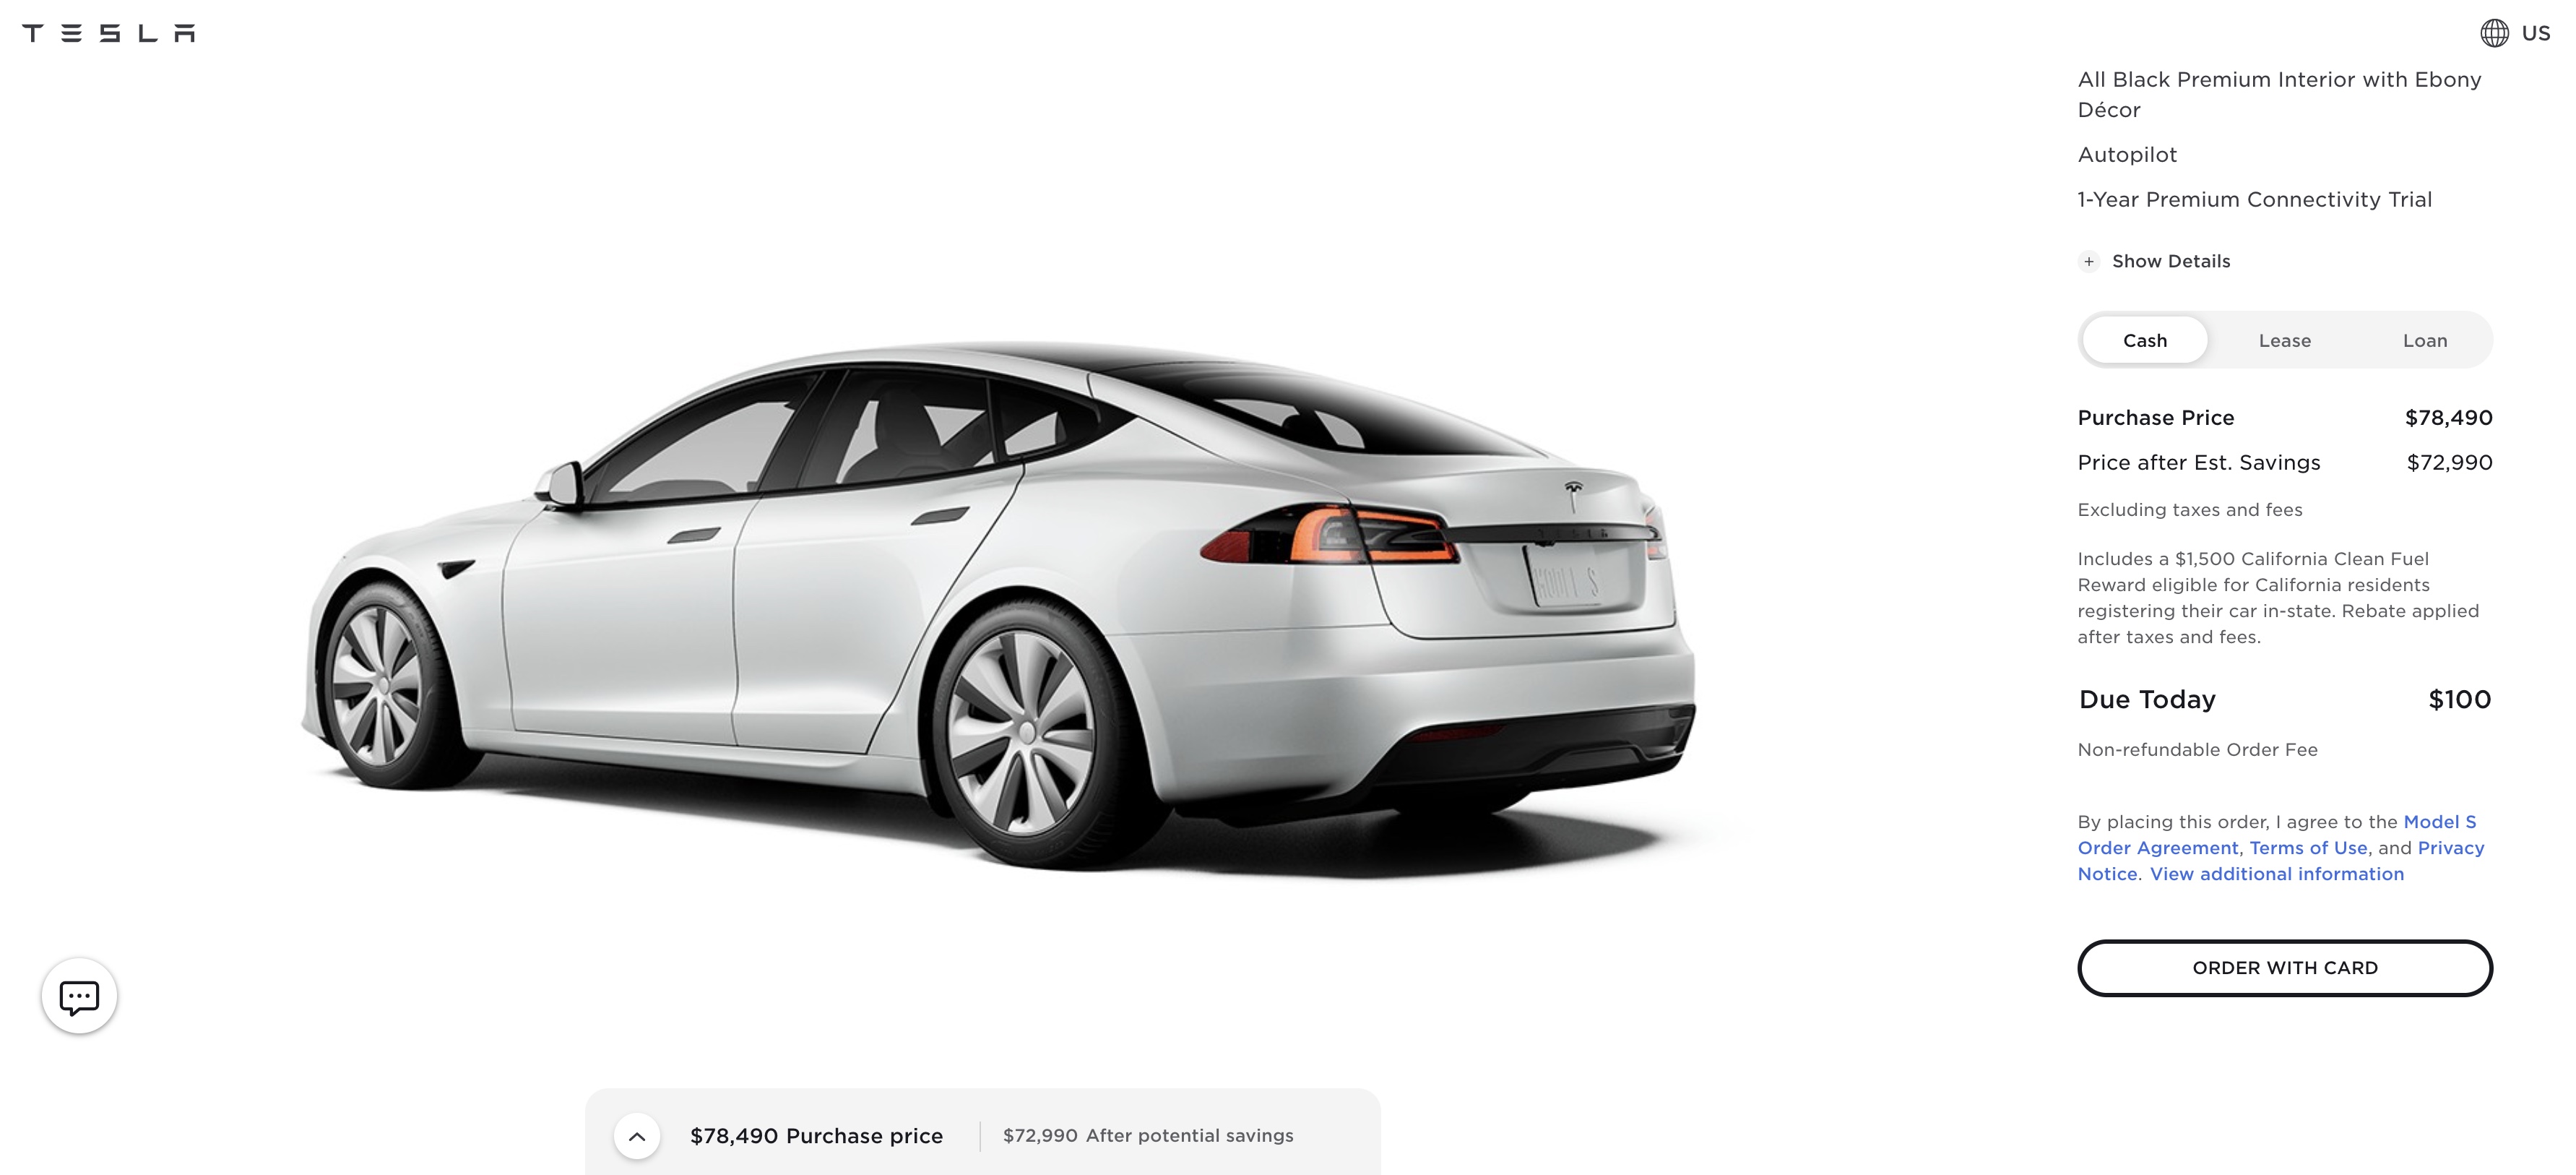 Tesla removes Bitcoin payment option over energy use ...